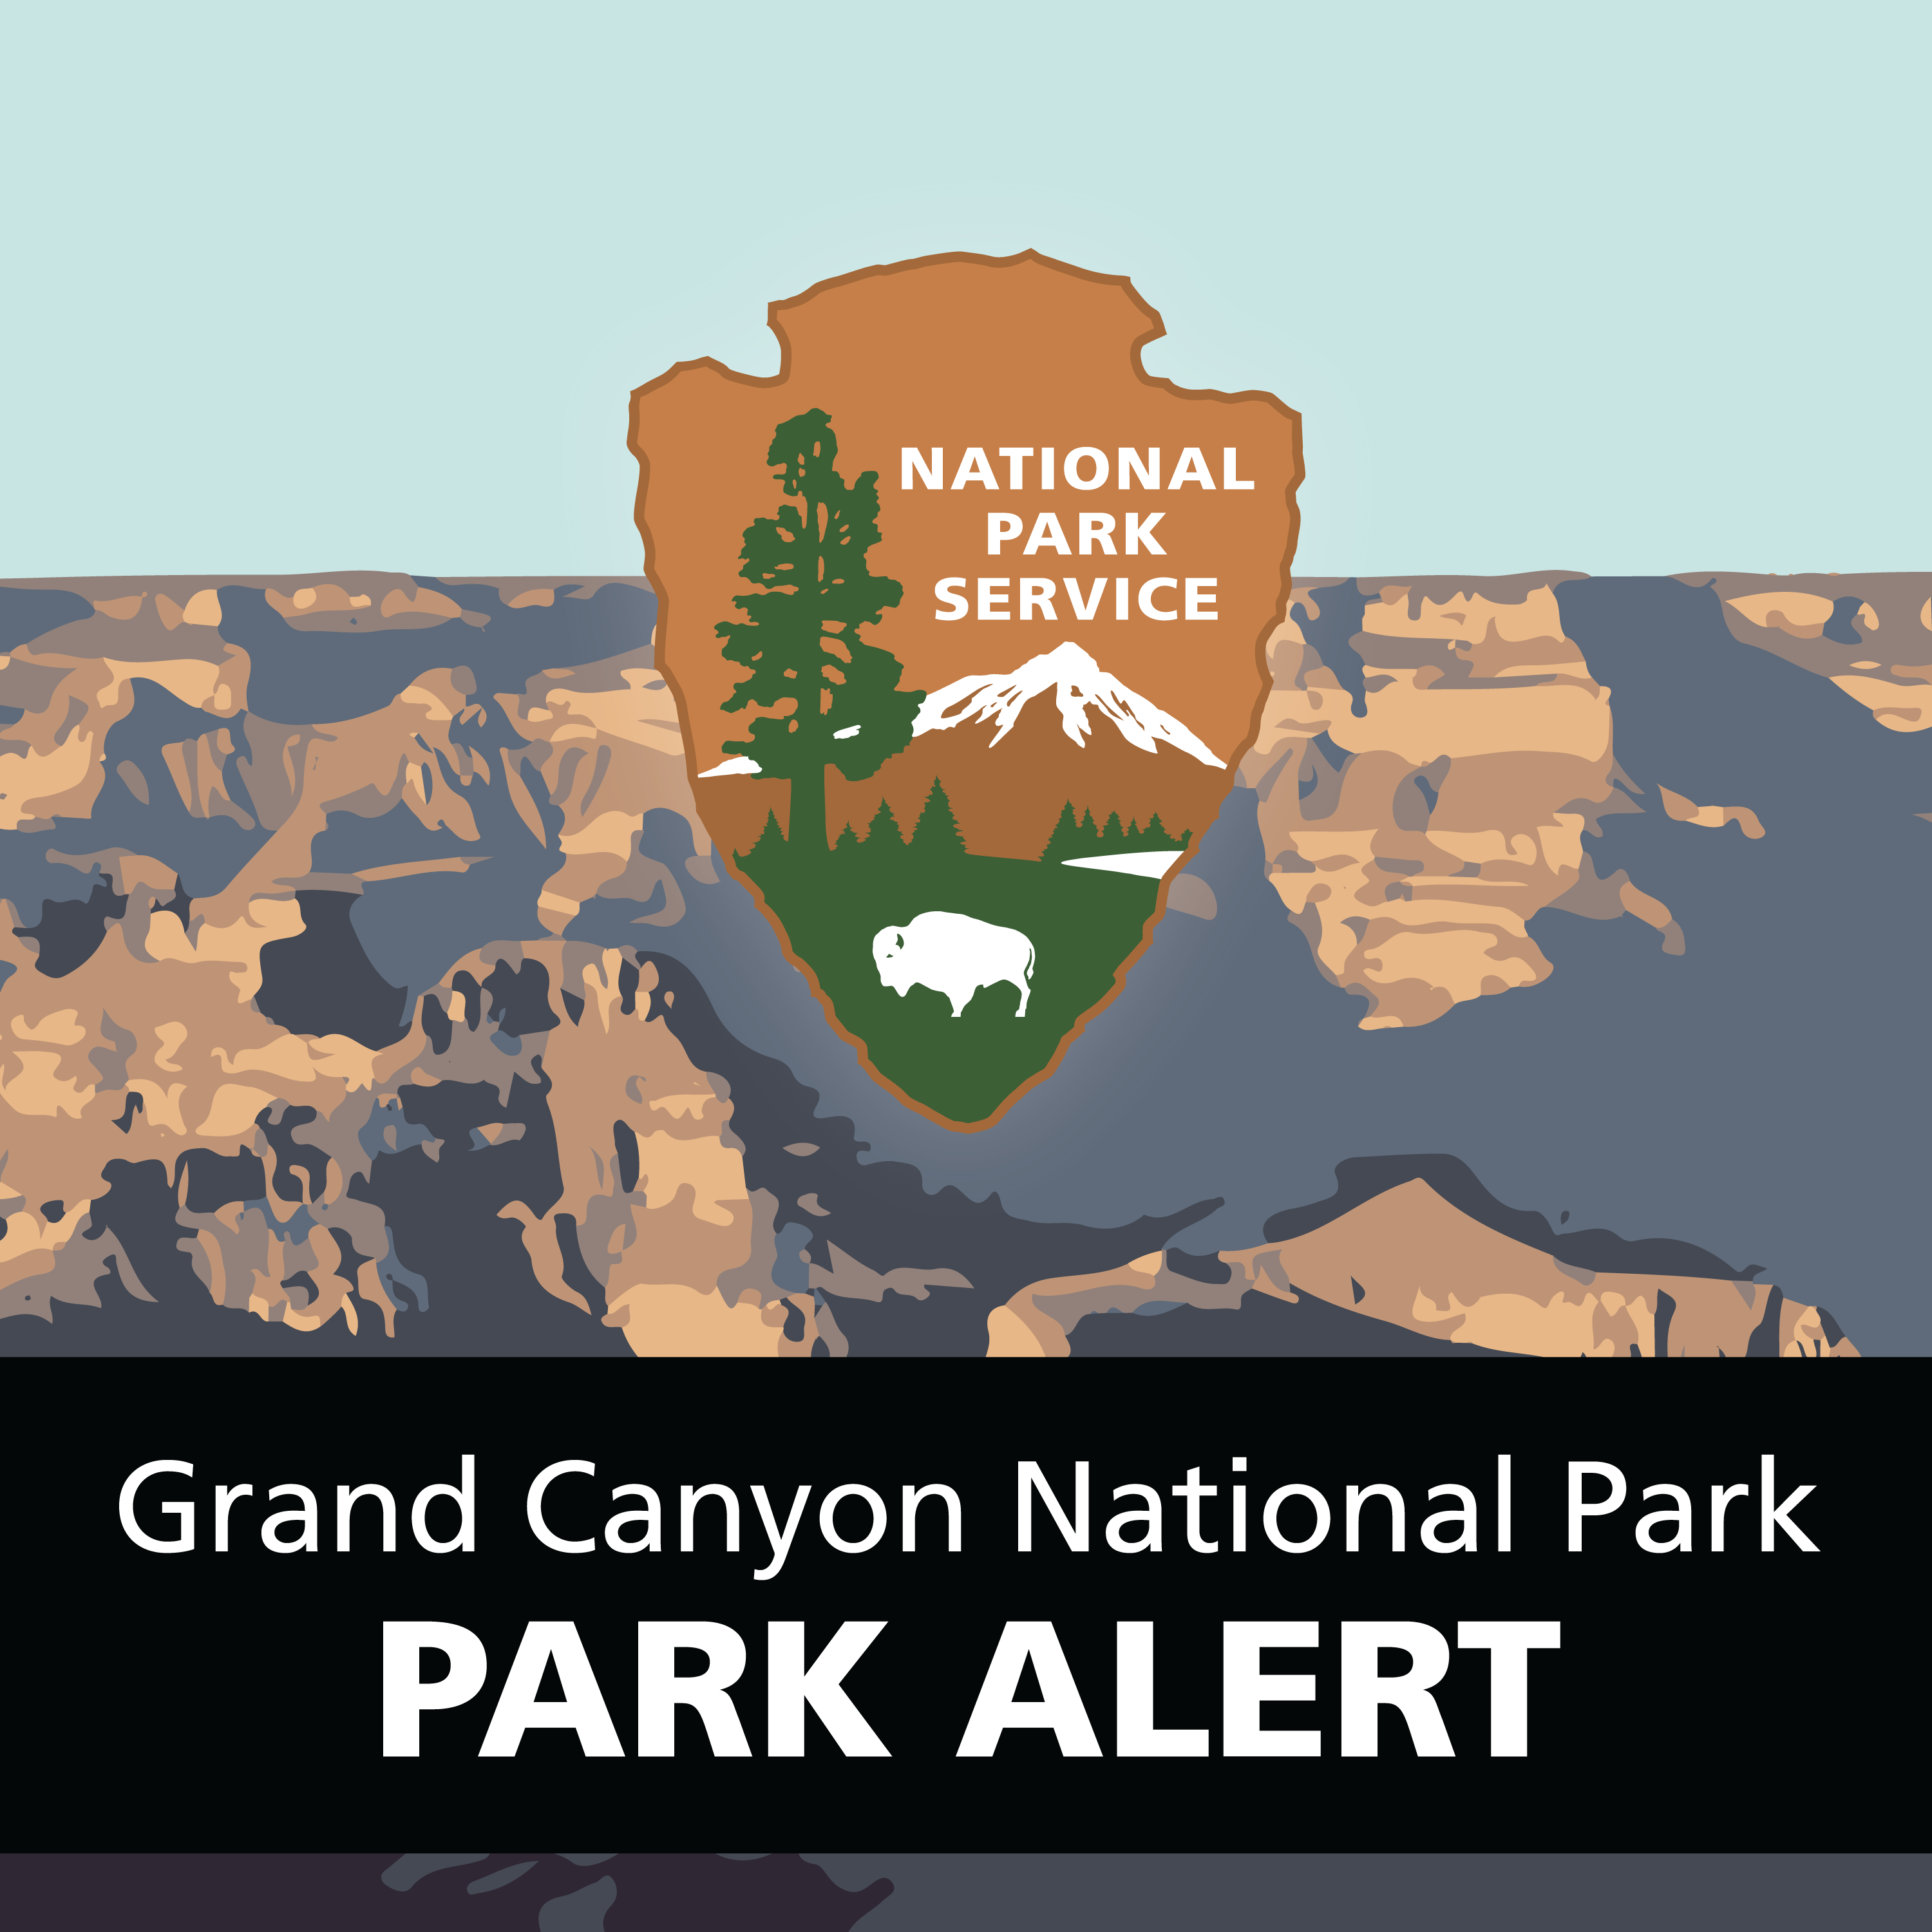 Grand Canyon Park Alert is in text with an image of the NPS arrowhead on a canyon background